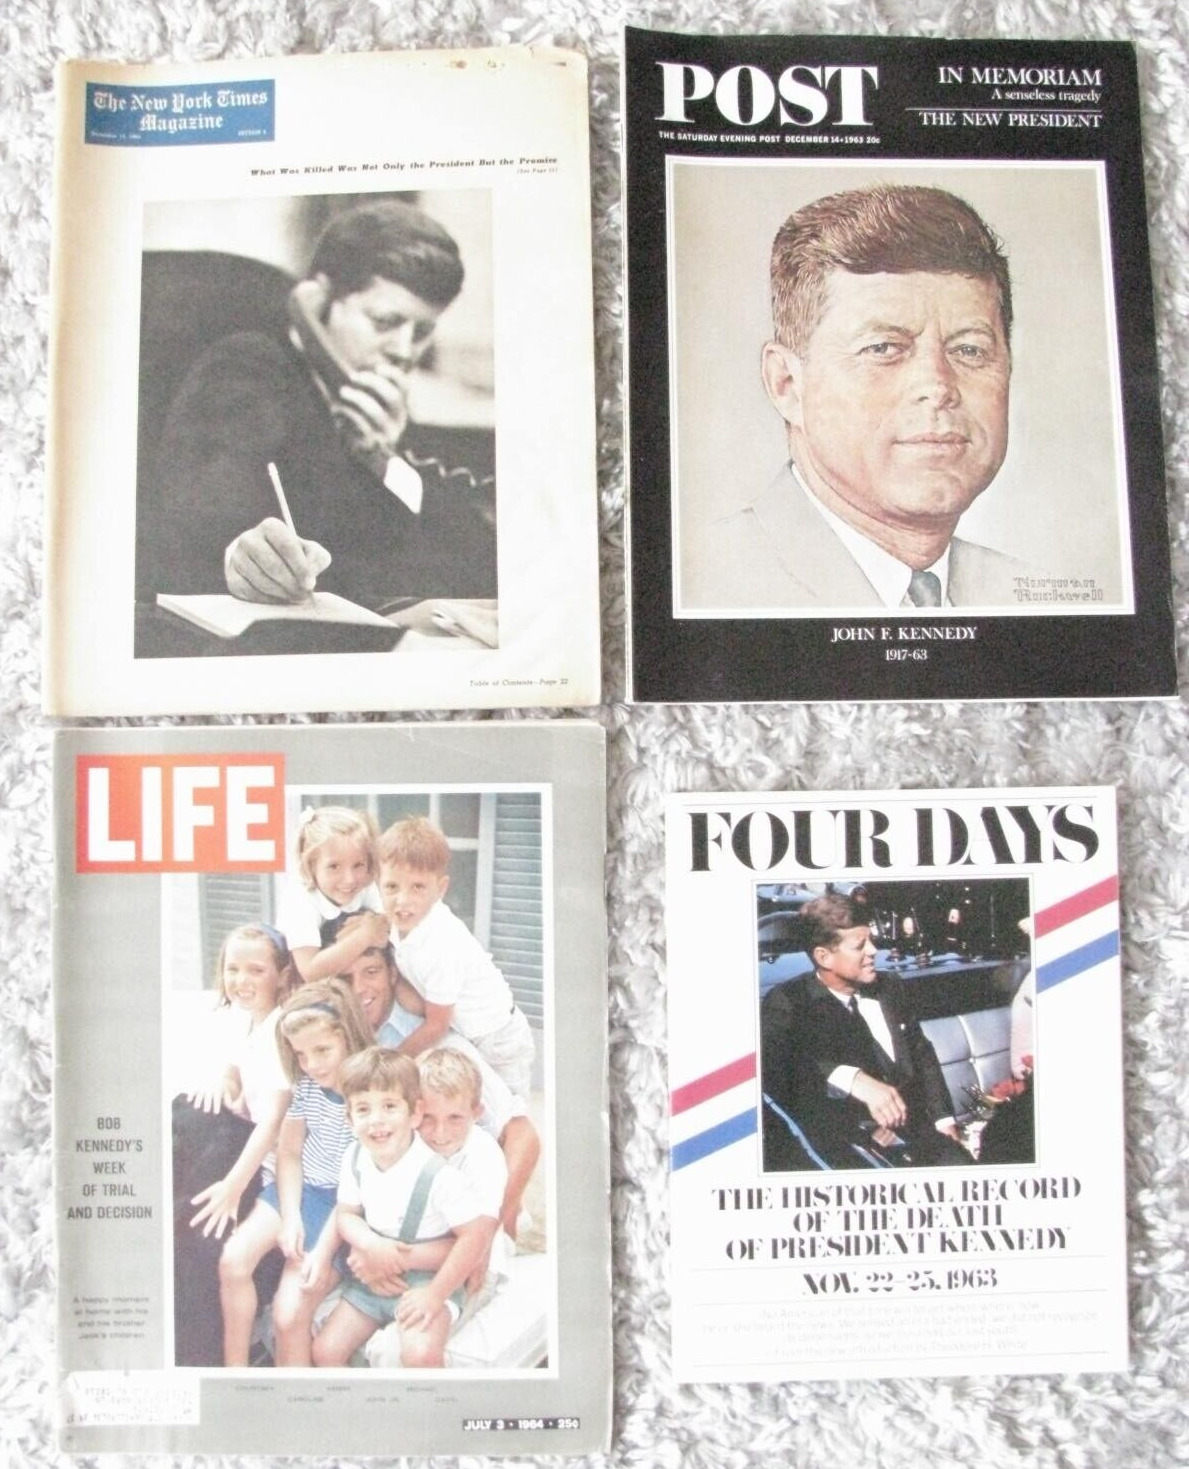 JFK - Kennedy - LIFE and POST Magazines - Lot of 4 - 1960\'s--Great Ads